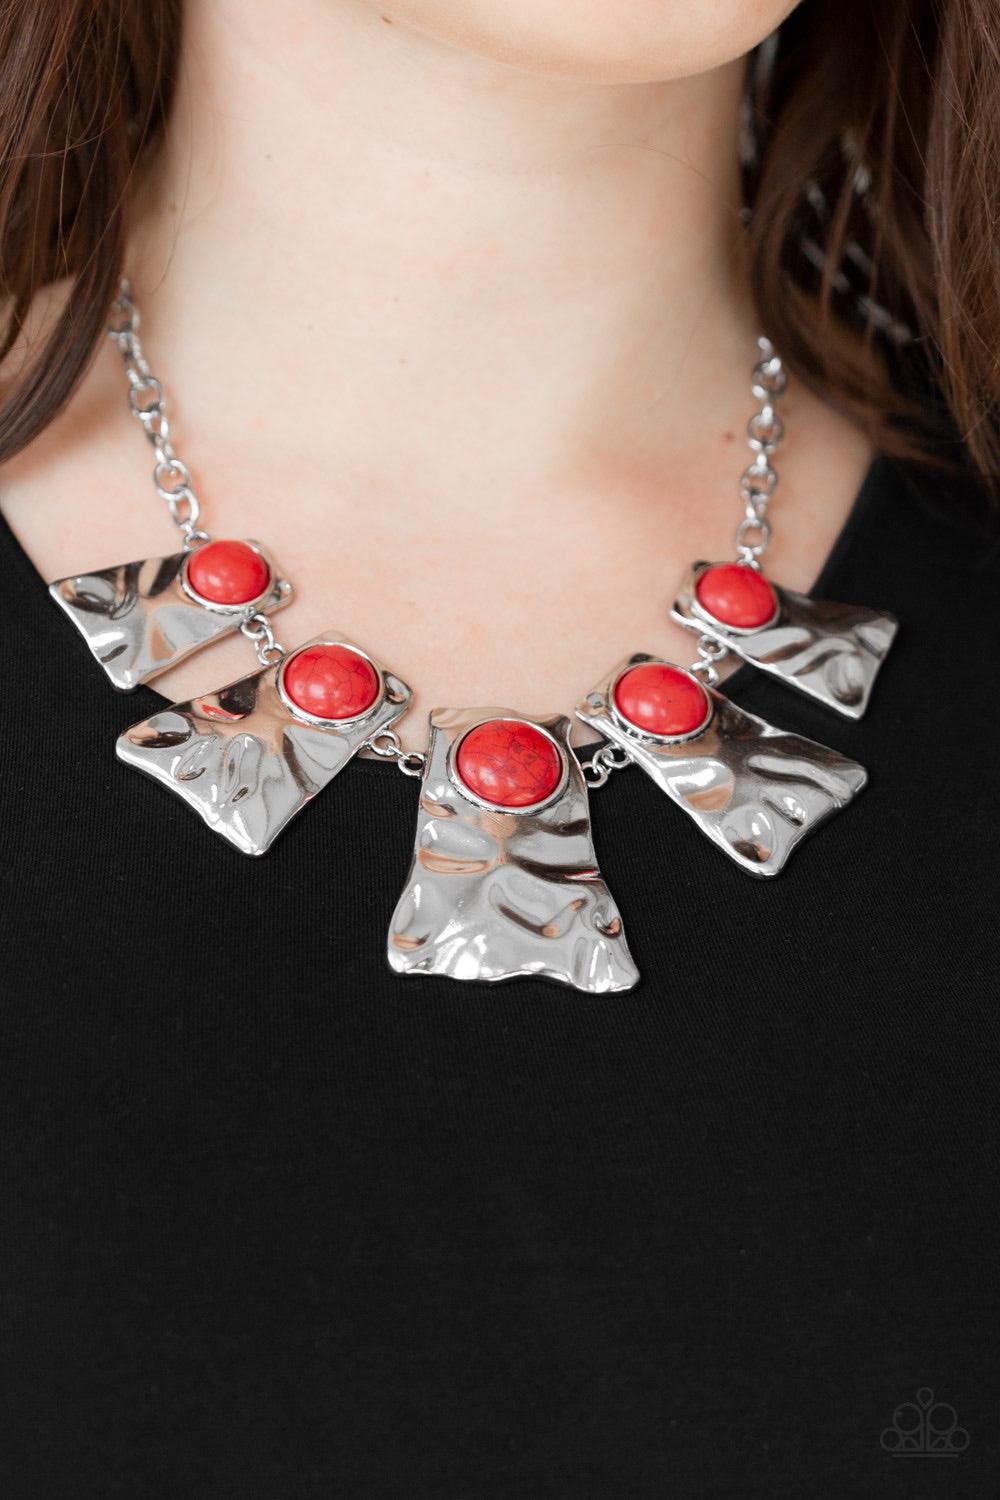 Paparazzi Accessories Cougar - Red Rippling with hammered details, flared silver frames join below the collar, creating a fierce fringe. Fiery red stones are pressed into the tops of the frames for a colorful finish. Features an adjustable clasp closure.